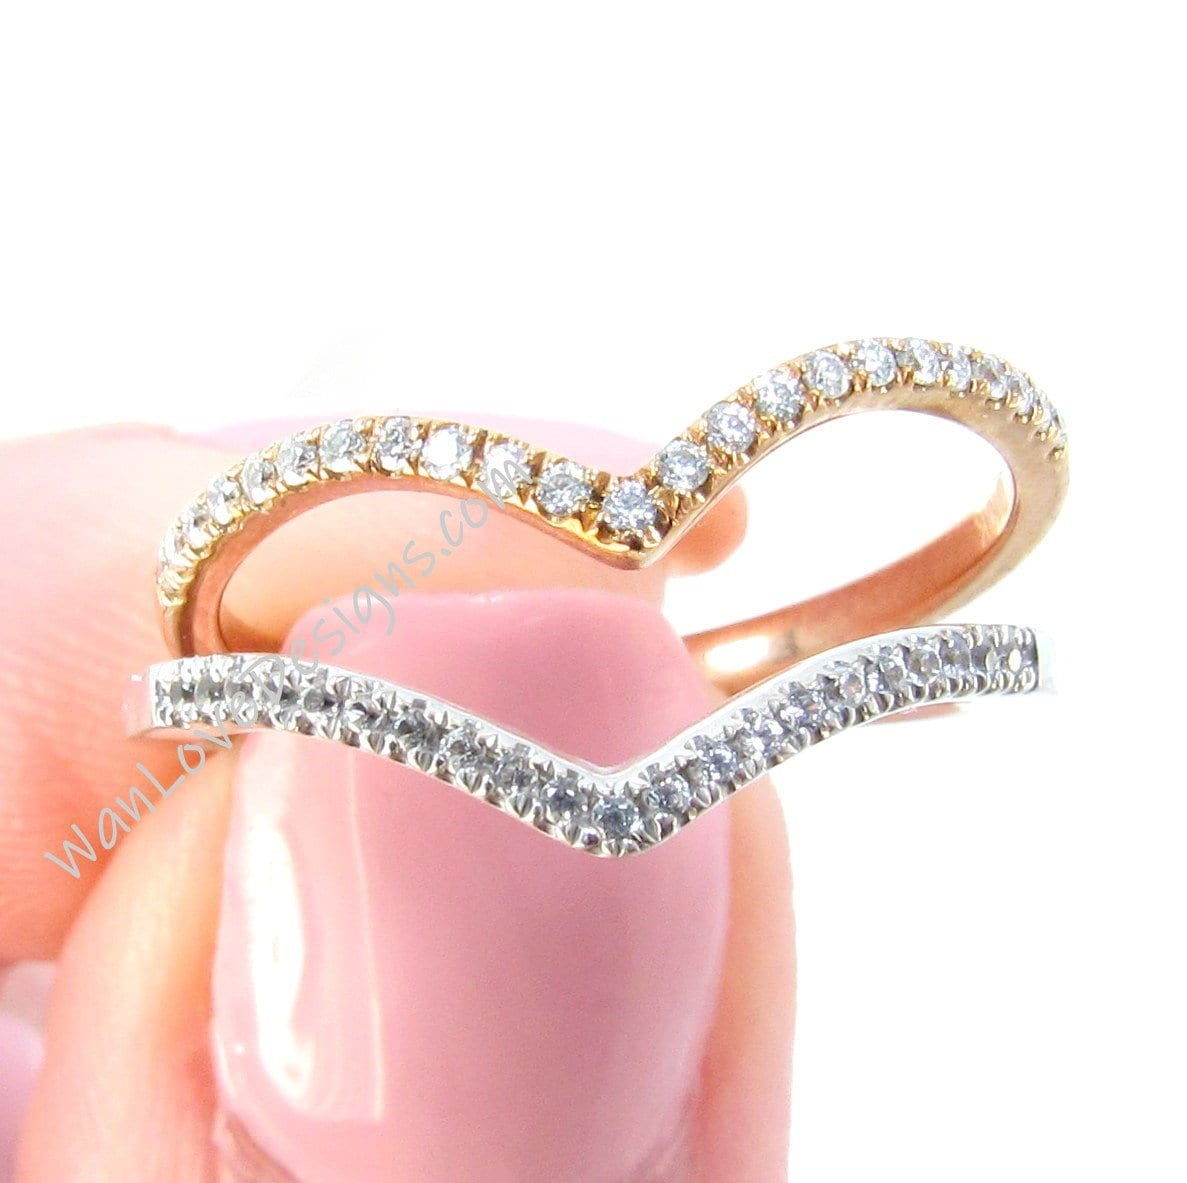 Sample Sale Ready to ship-Moissanite Rose Gold OR White Sapphire Tiara Curved Diamonds Band Nesting Ring Wan Love Designs